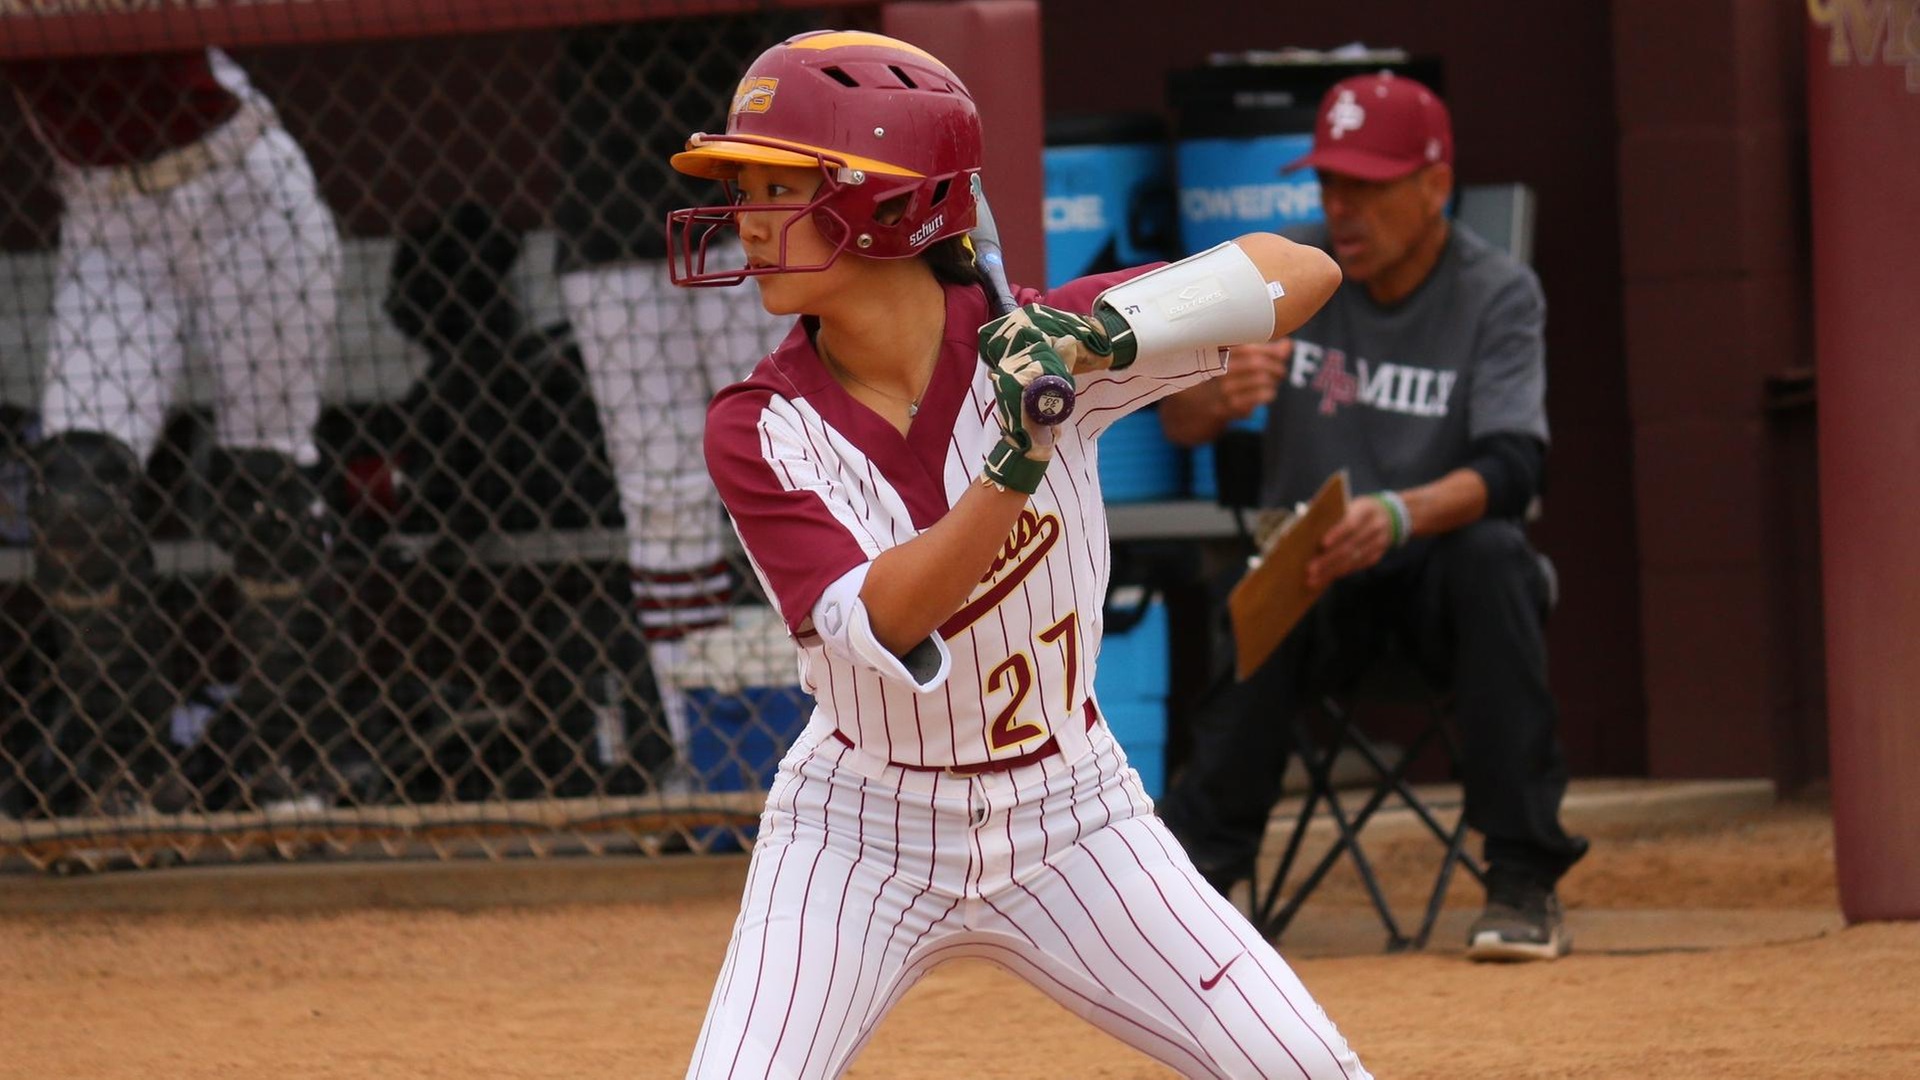 Emma Suh had a pair of two-hit games for the Athenas